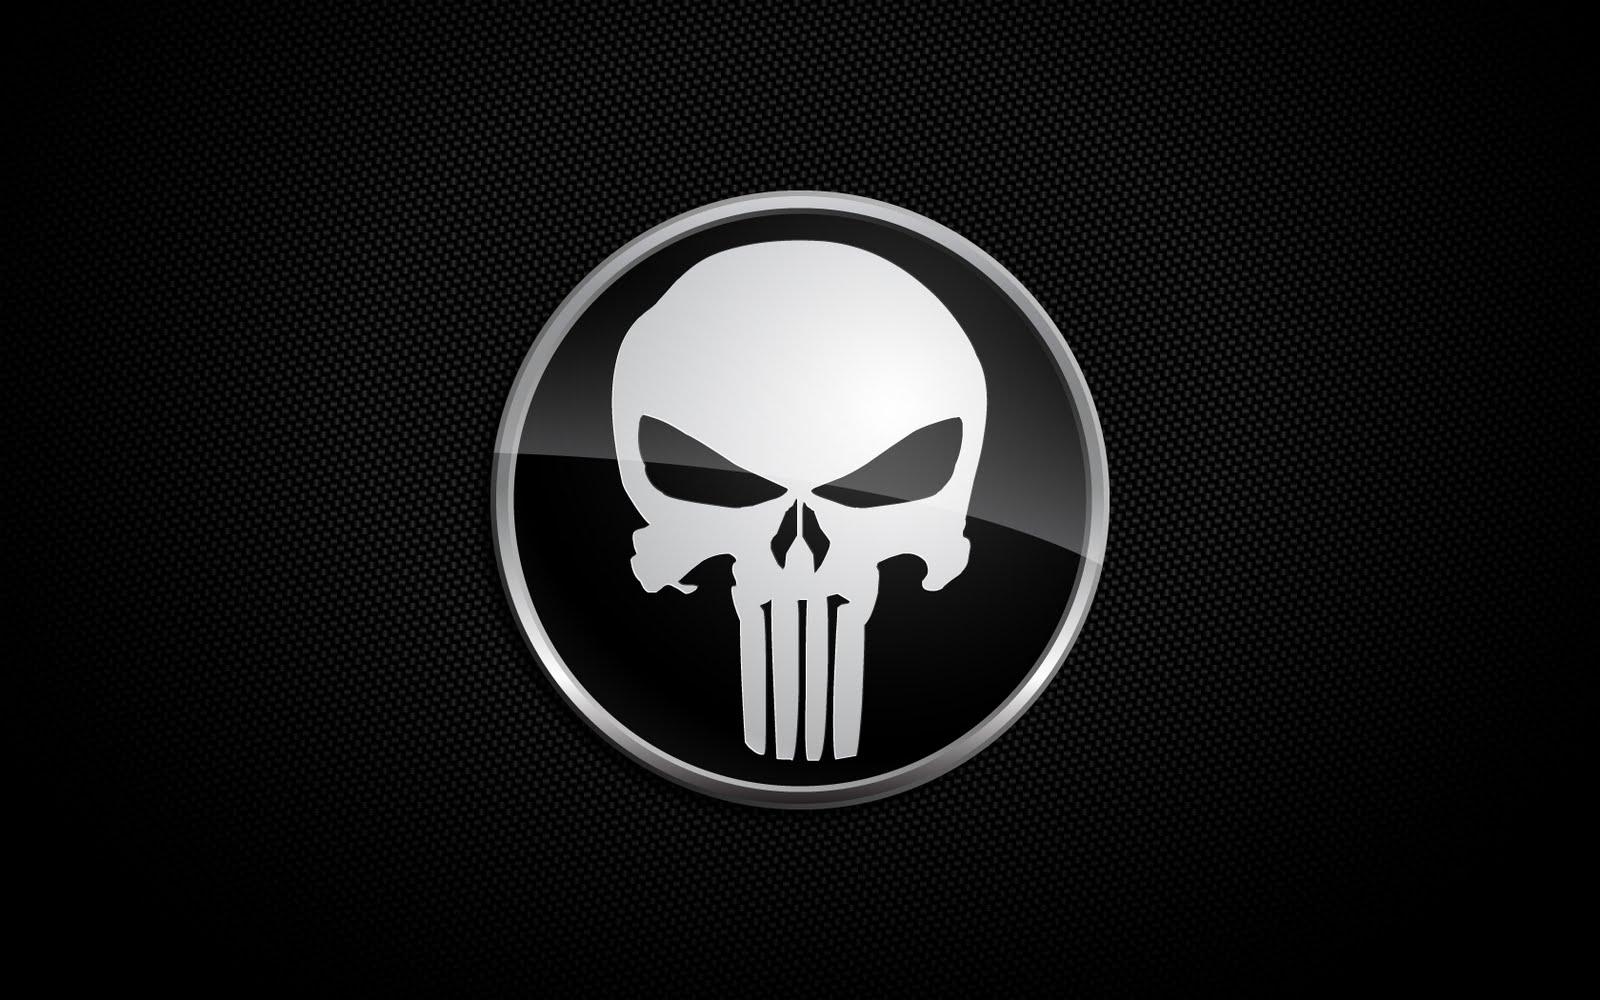 Punisher skull wallpaper. Clickandseeworld is all about Funny